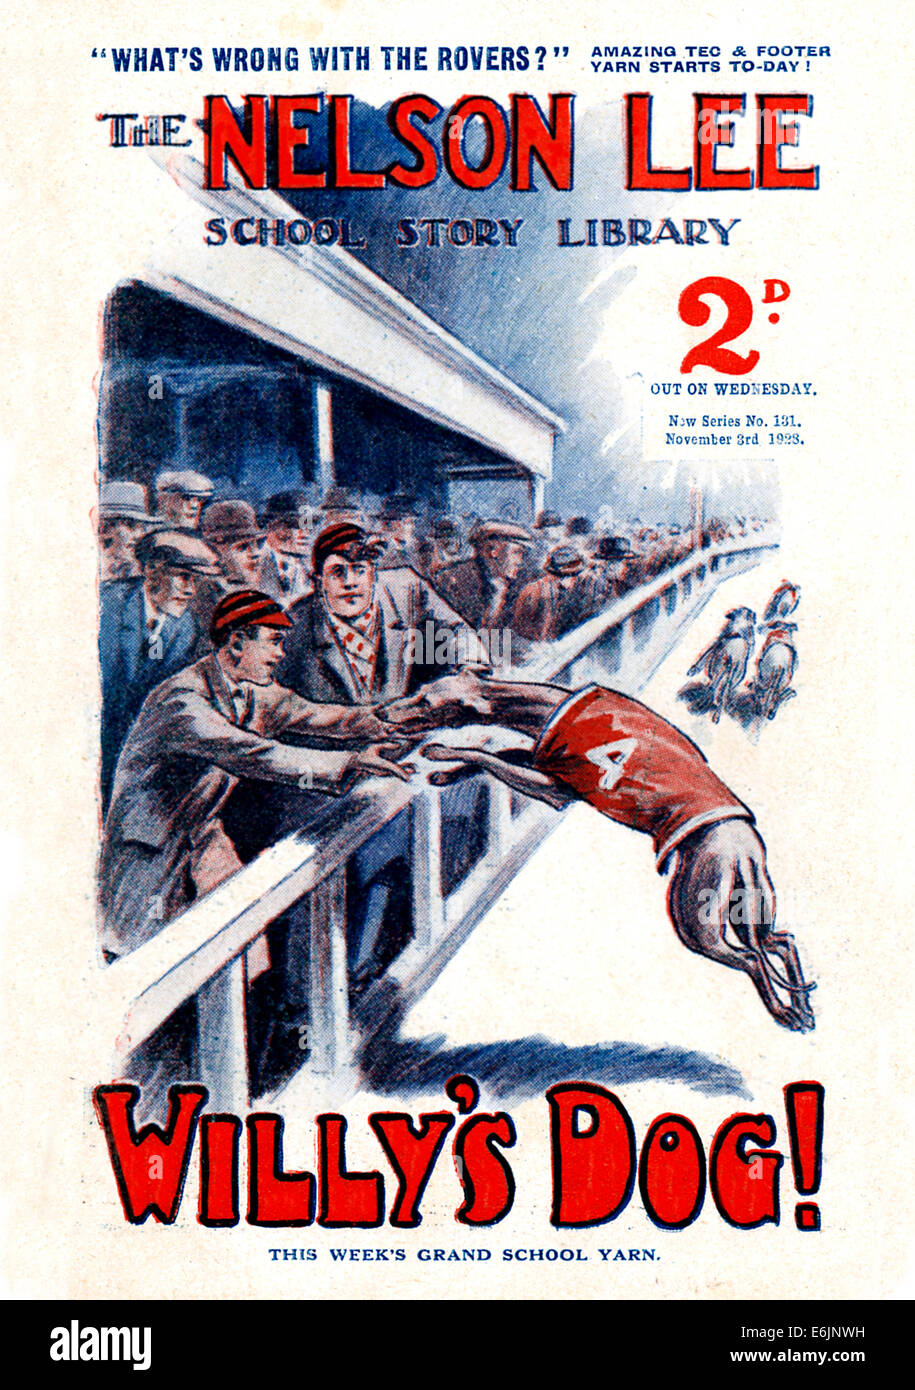 Willys Dog, 1920s comic book cover featuring a greyhound racing story Stock Photo